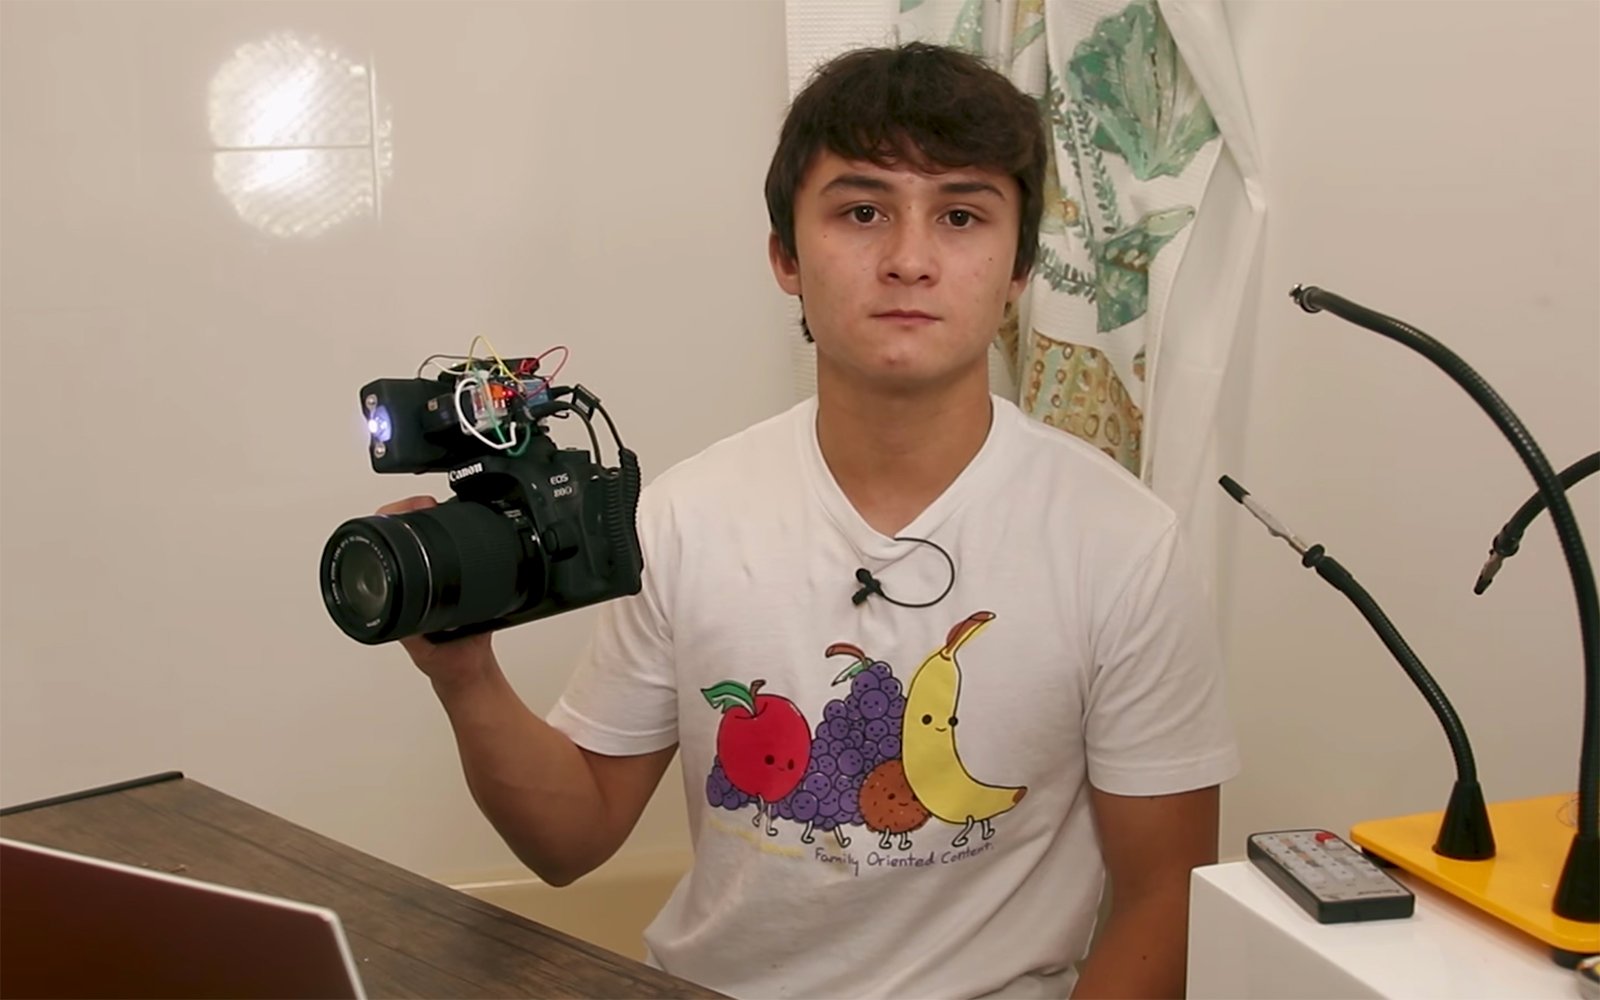 This Guy Created a Tazer Camera that Electrocutes His Subjects